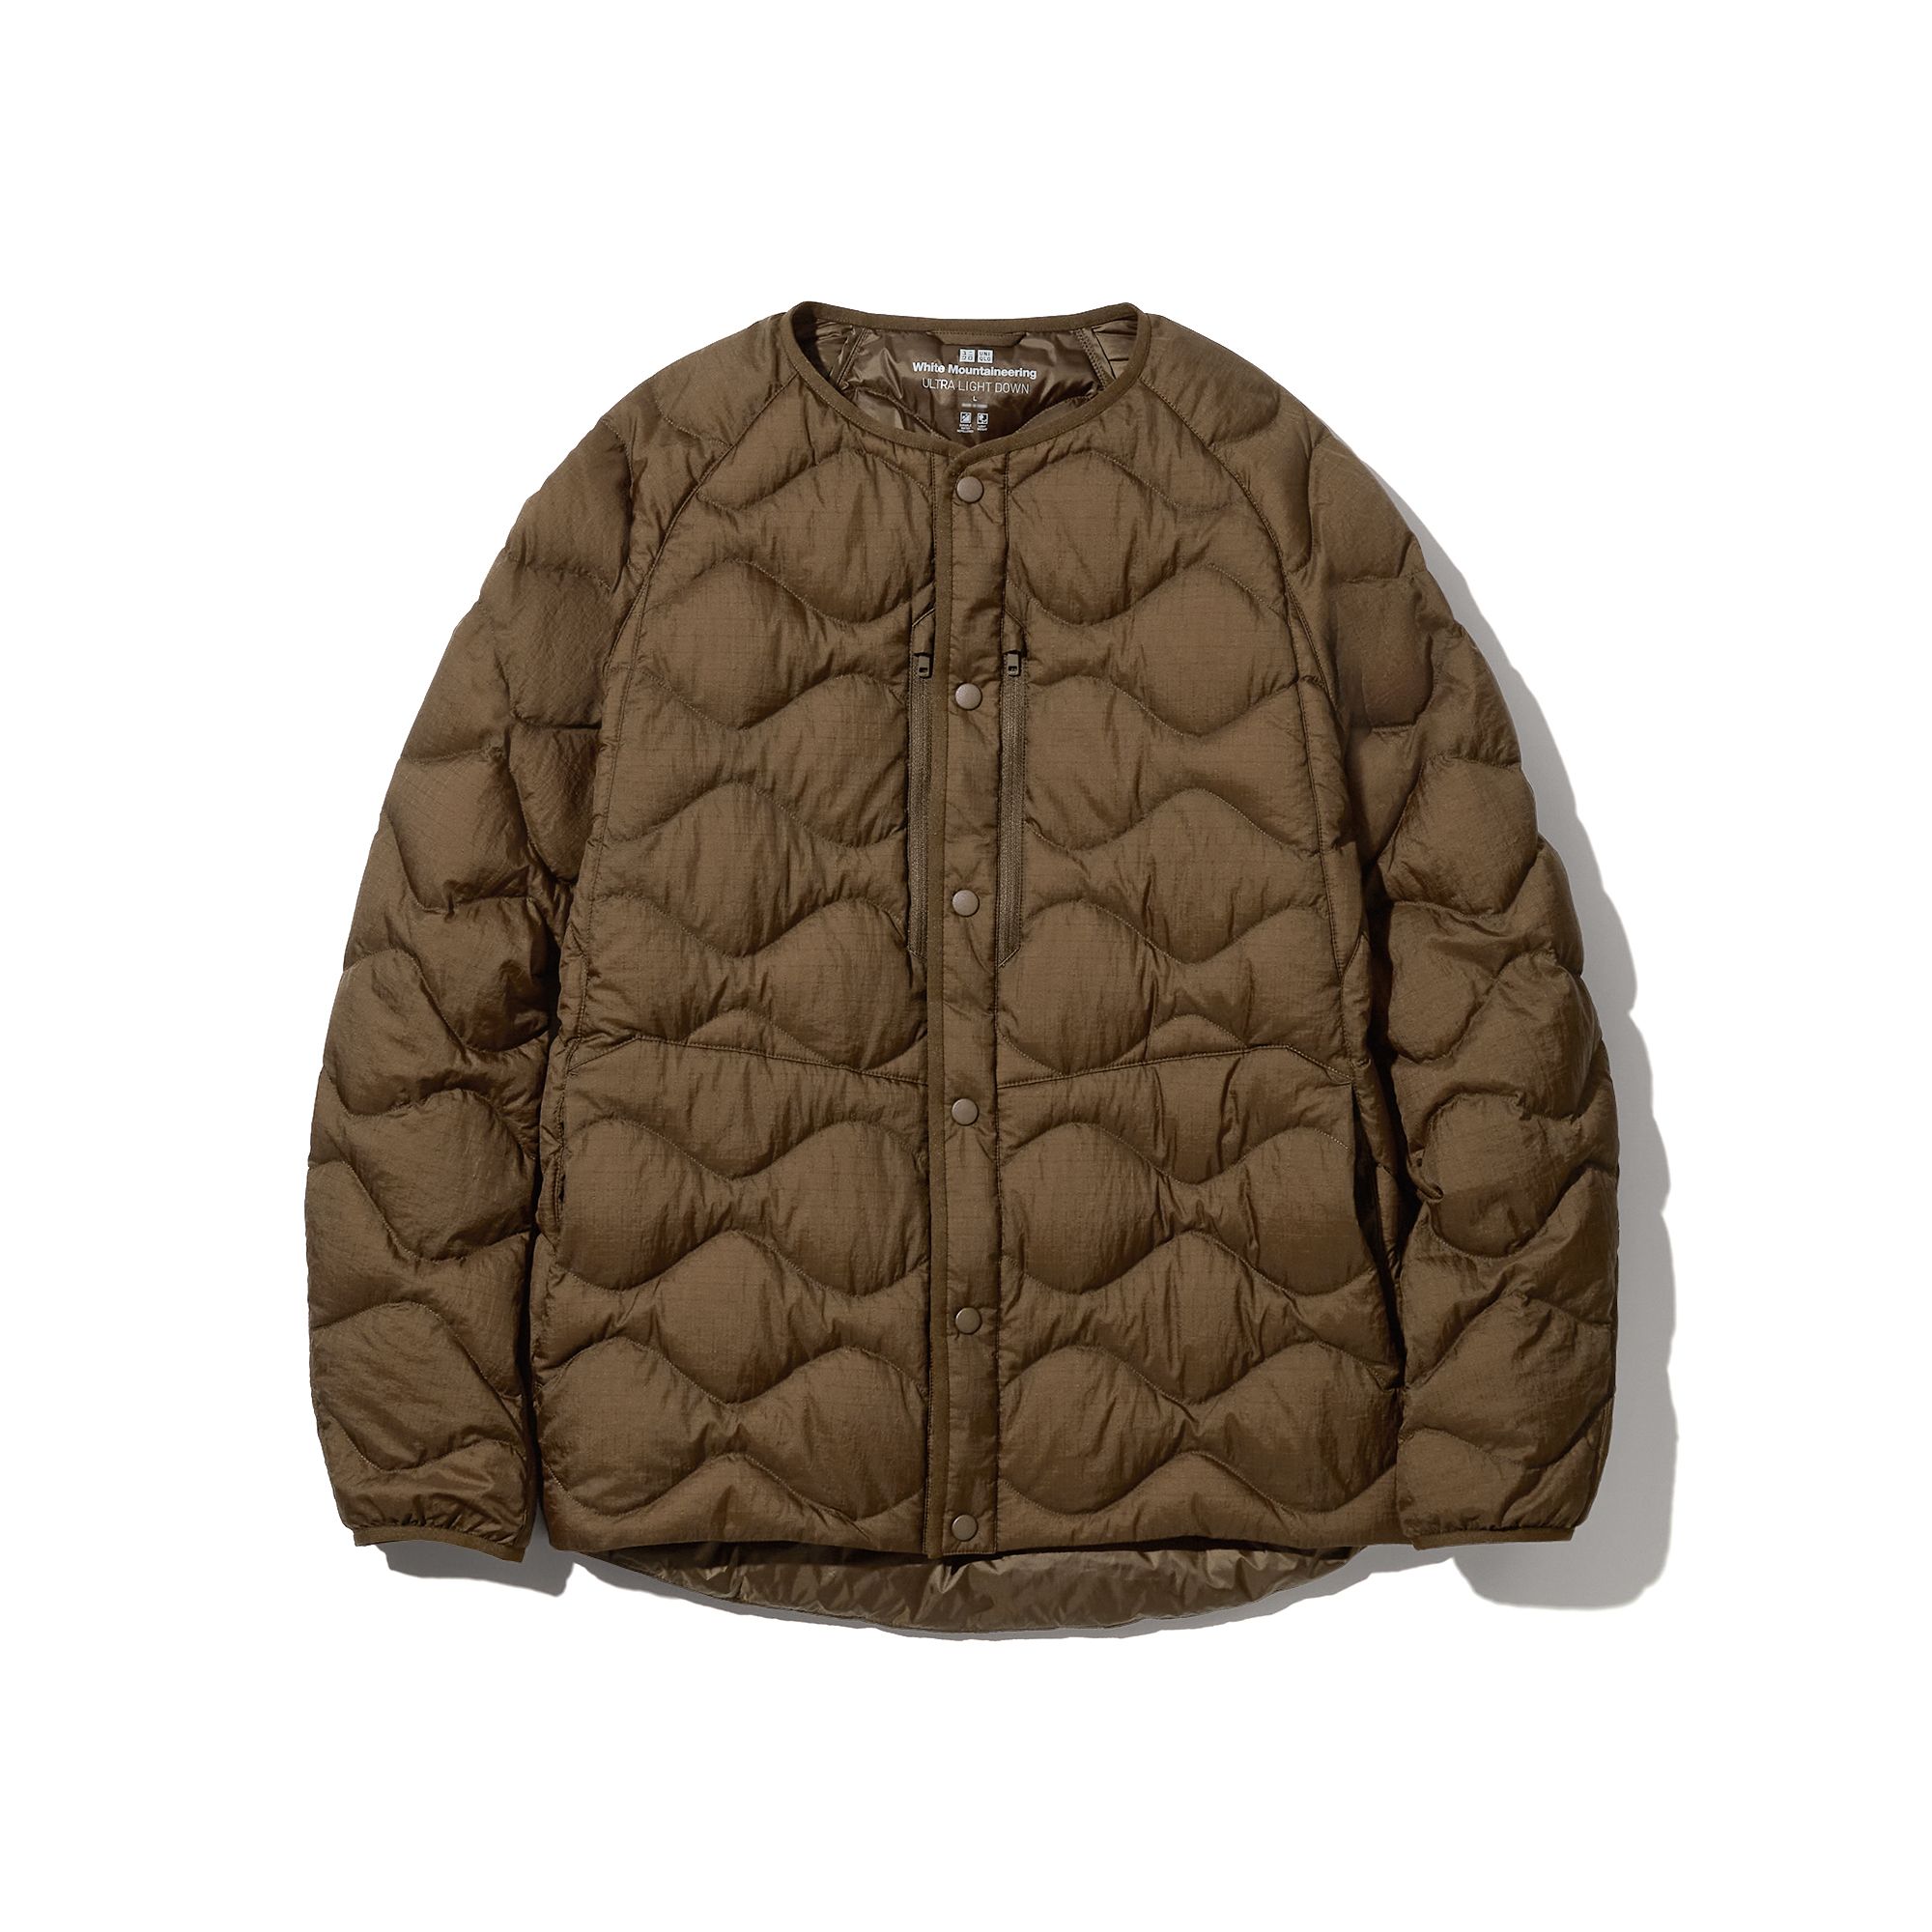 White Mountaineering Made Outerwear for Uniqlo